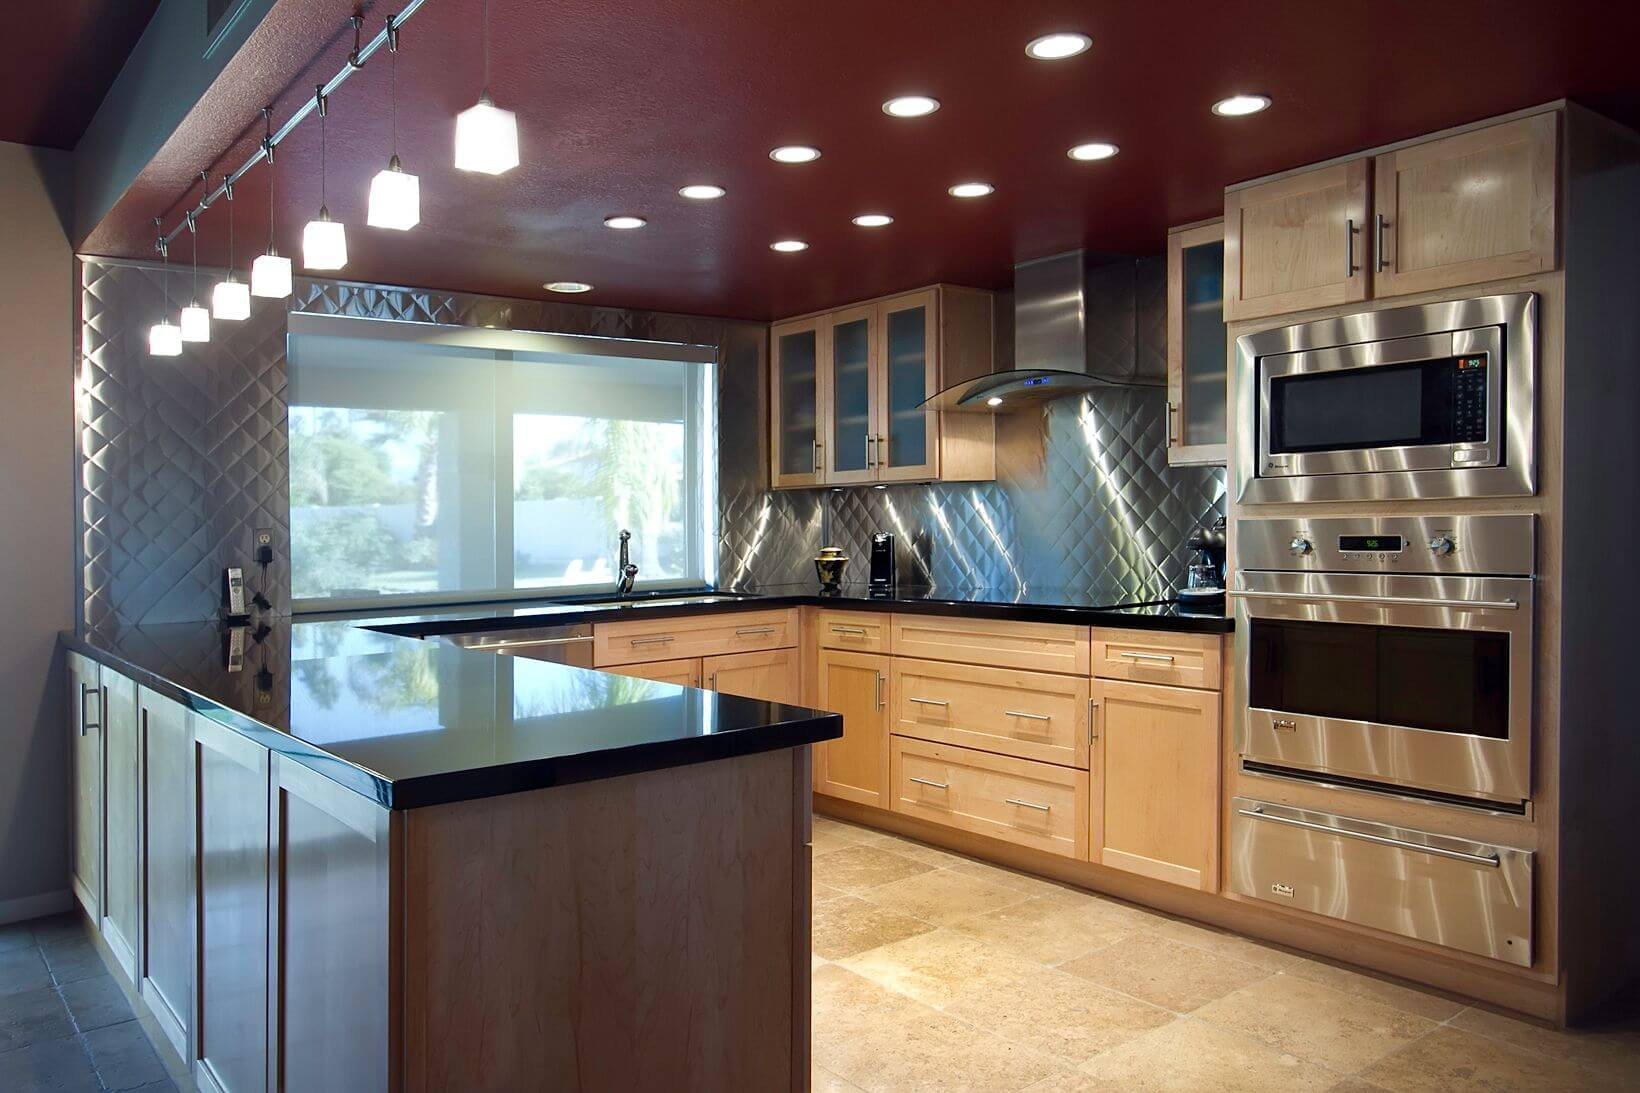 Kitchen Remodeling Photo
 15 Kitchen Remodeling Ideas Designs & s TheyDesign